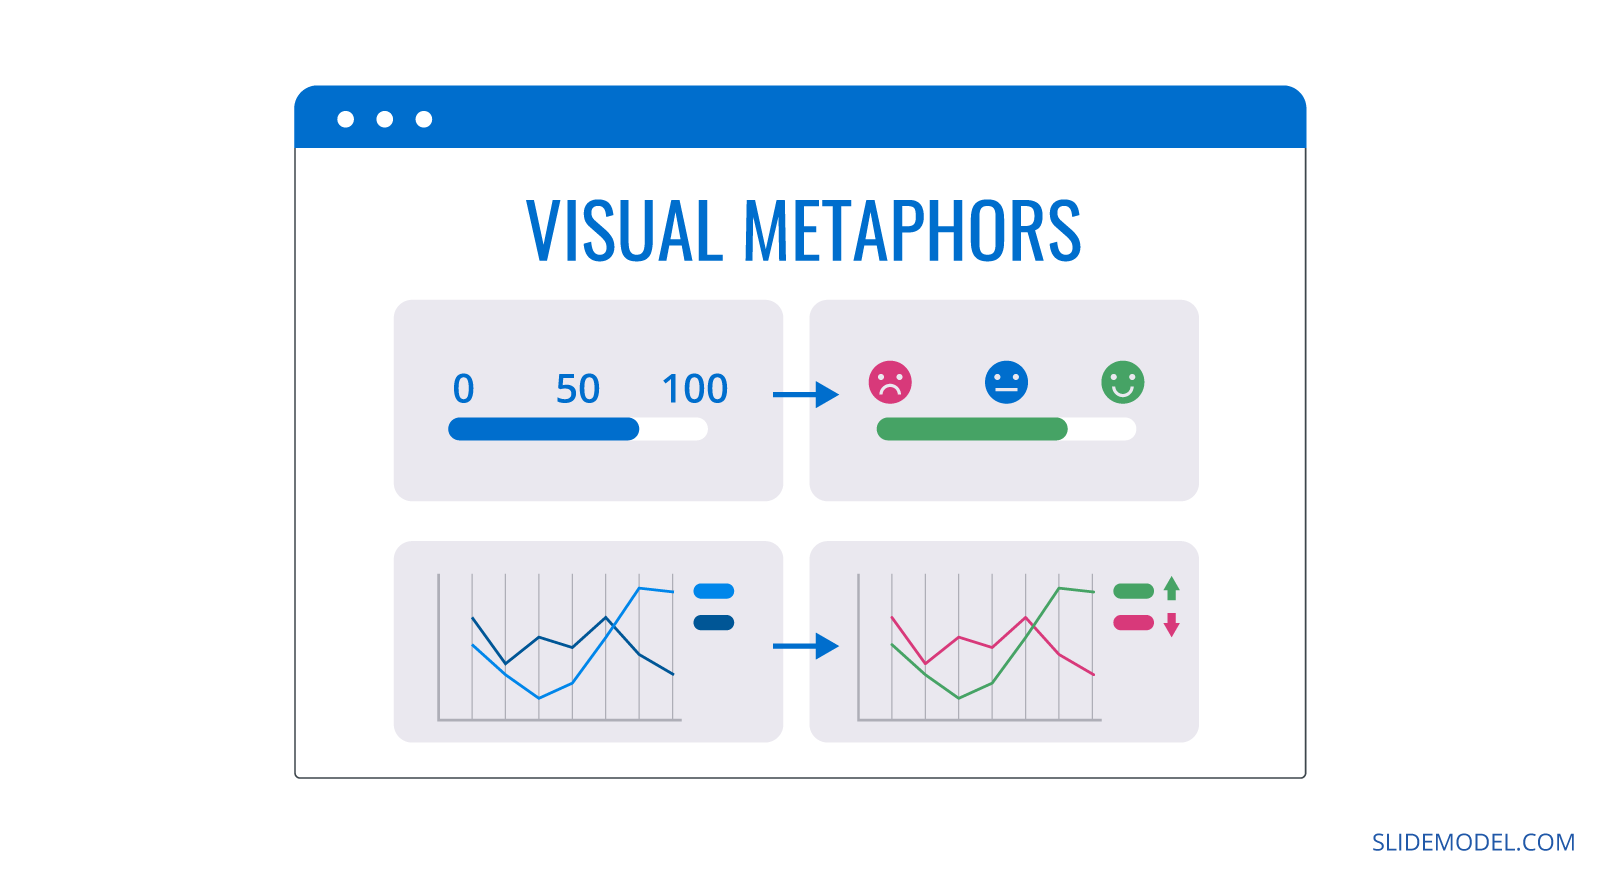 The usage of Visual Metaphors in Dashboards